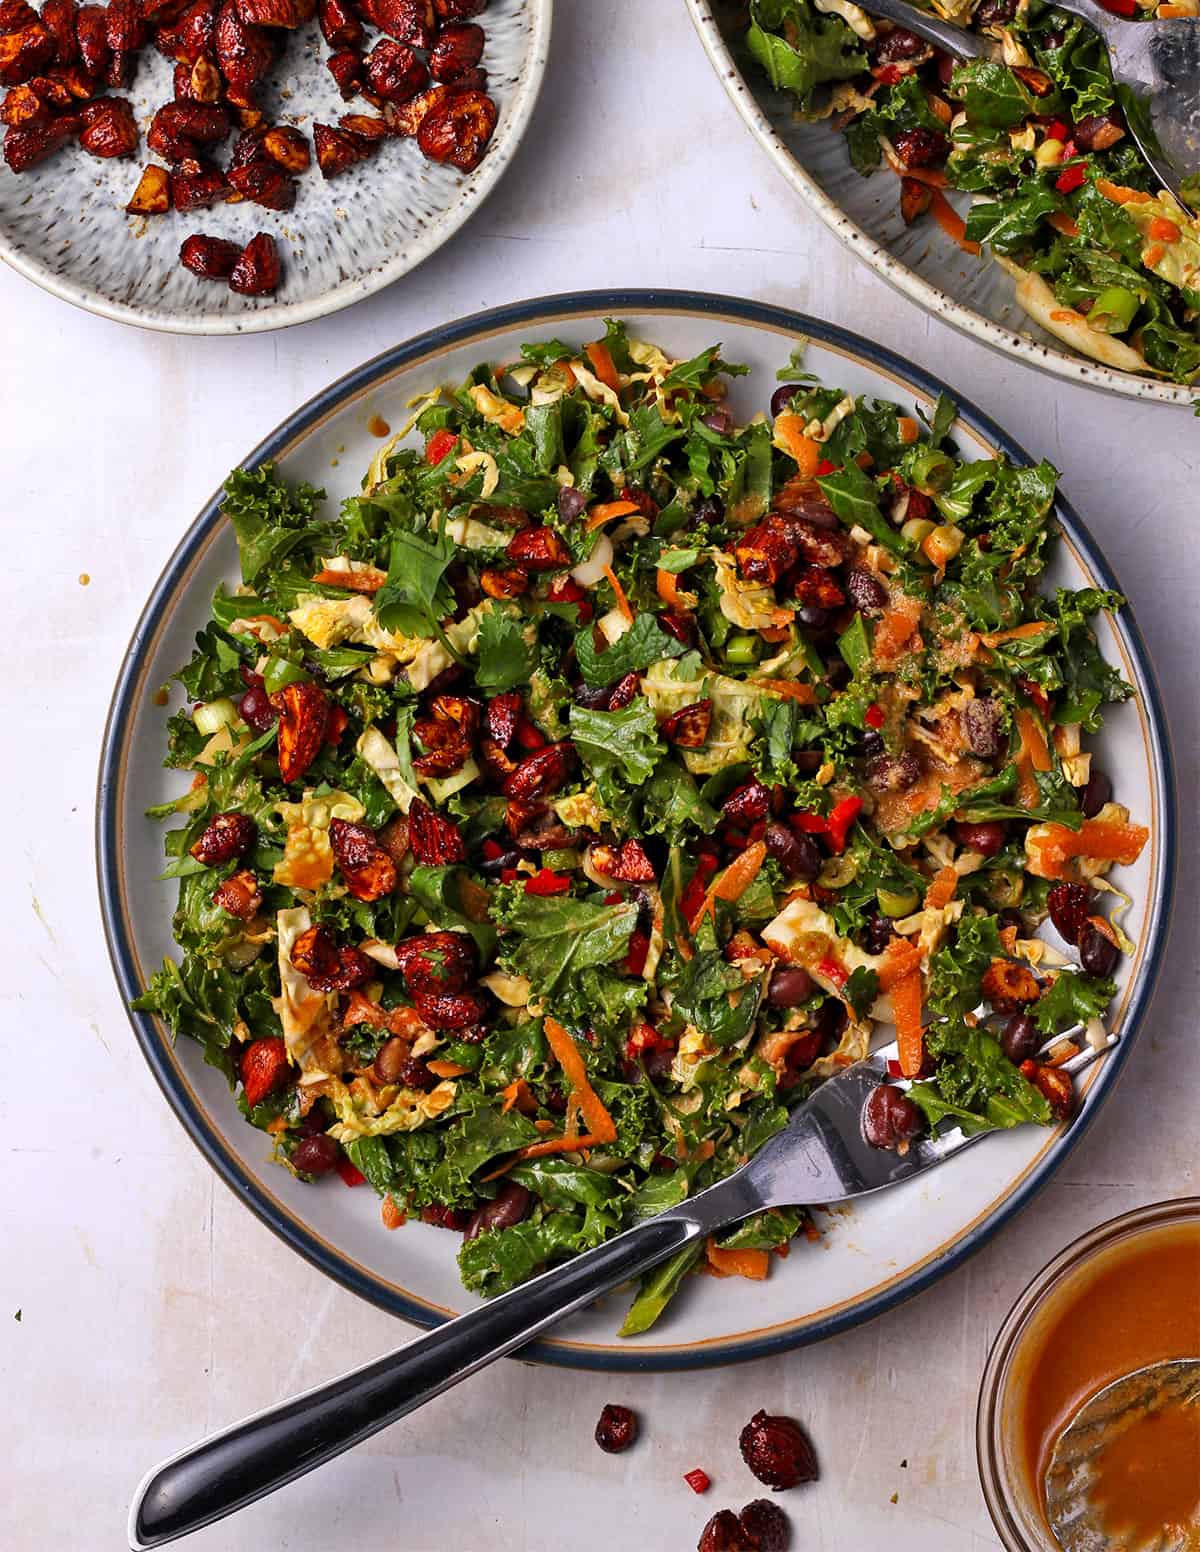 Asian kale salad with almonds and Adzuki beans on a plate with a fork.